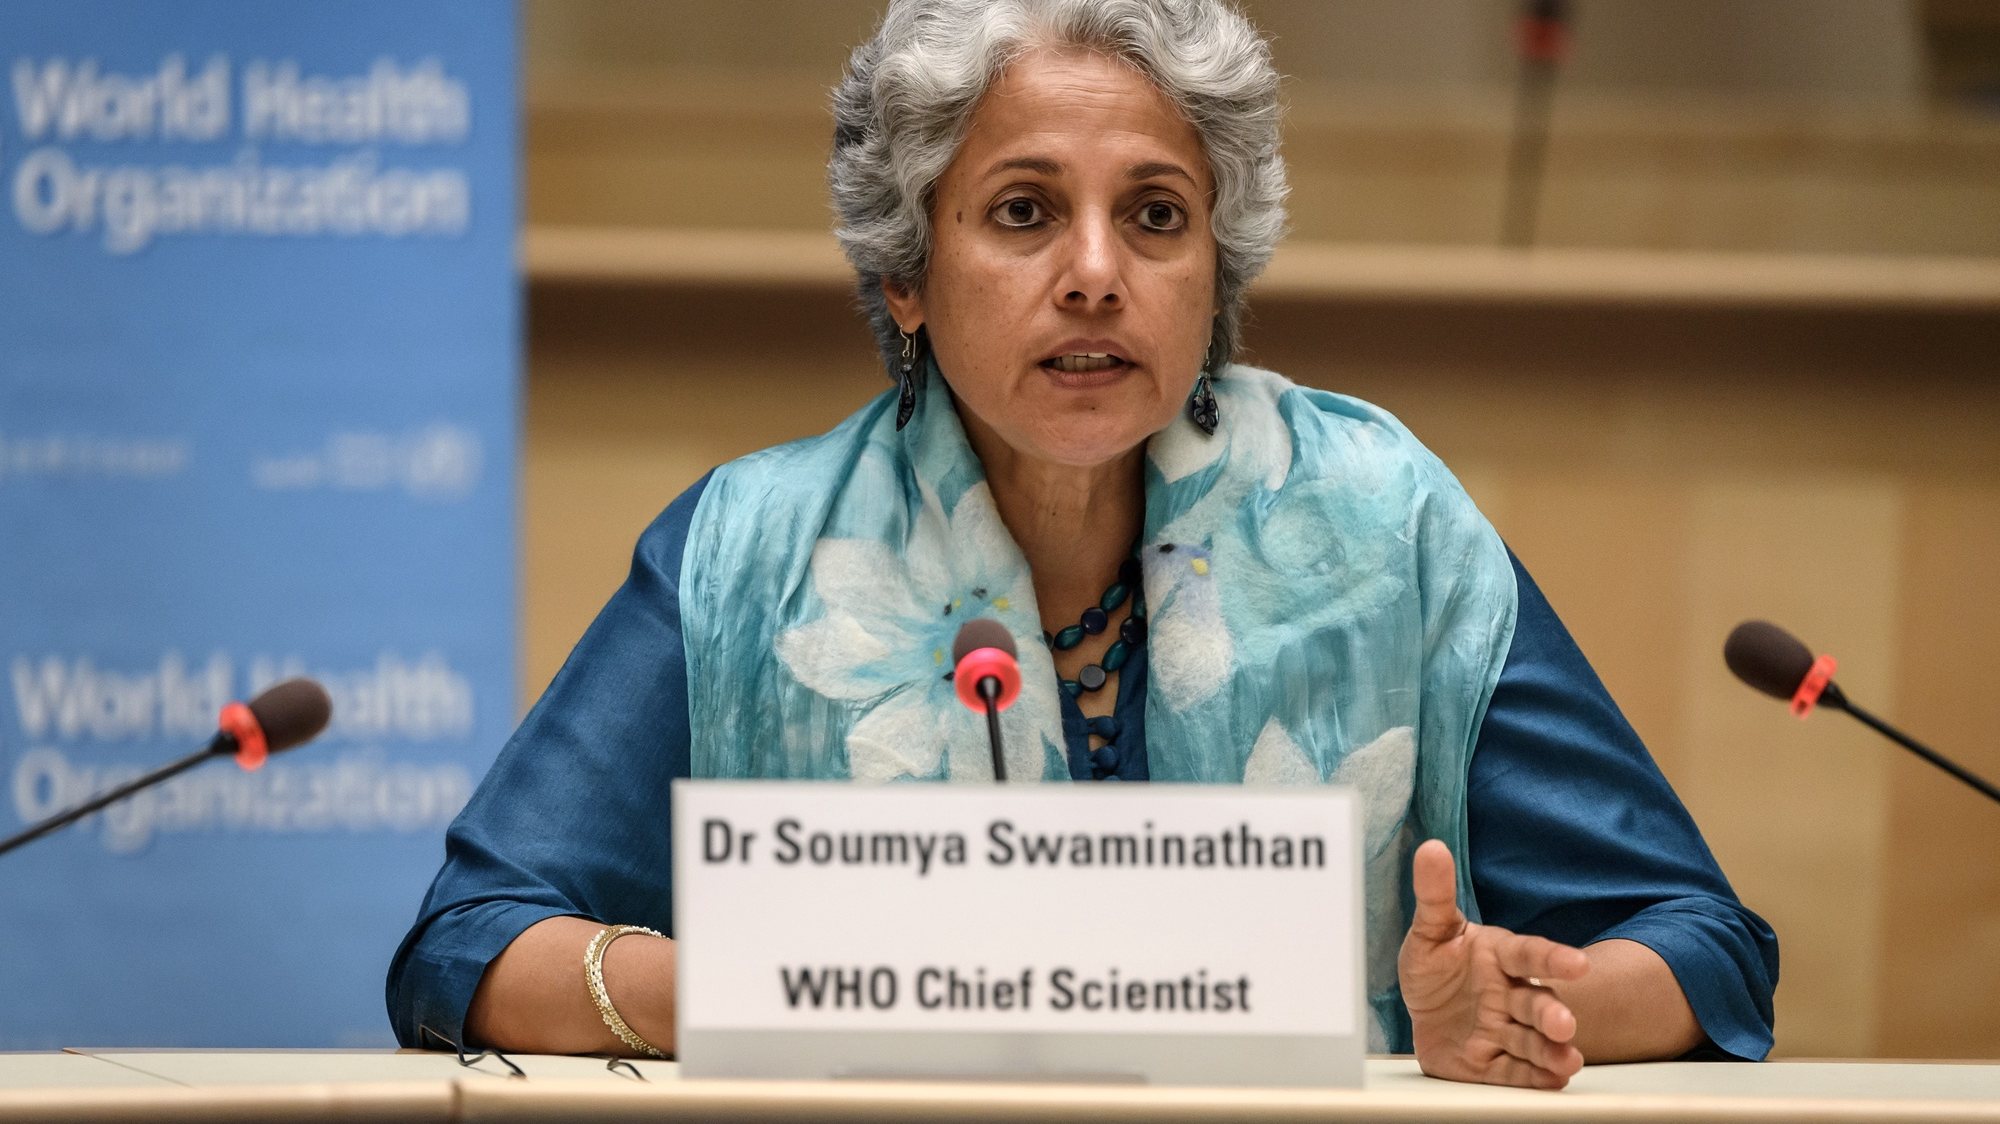 epa08525444 World Health Organization (WHO) Chief Scientist Soumya Swaminathan attends a press conference organized by the Geneva Association of United Nations Correspondents (ACANU) amid the COVID-19 pandemic, caused by the novel coronavirus, at the WHO headquarters in Geneva, Switzerland, 03 July 2020.  EPA/FABRICE COFFRINI